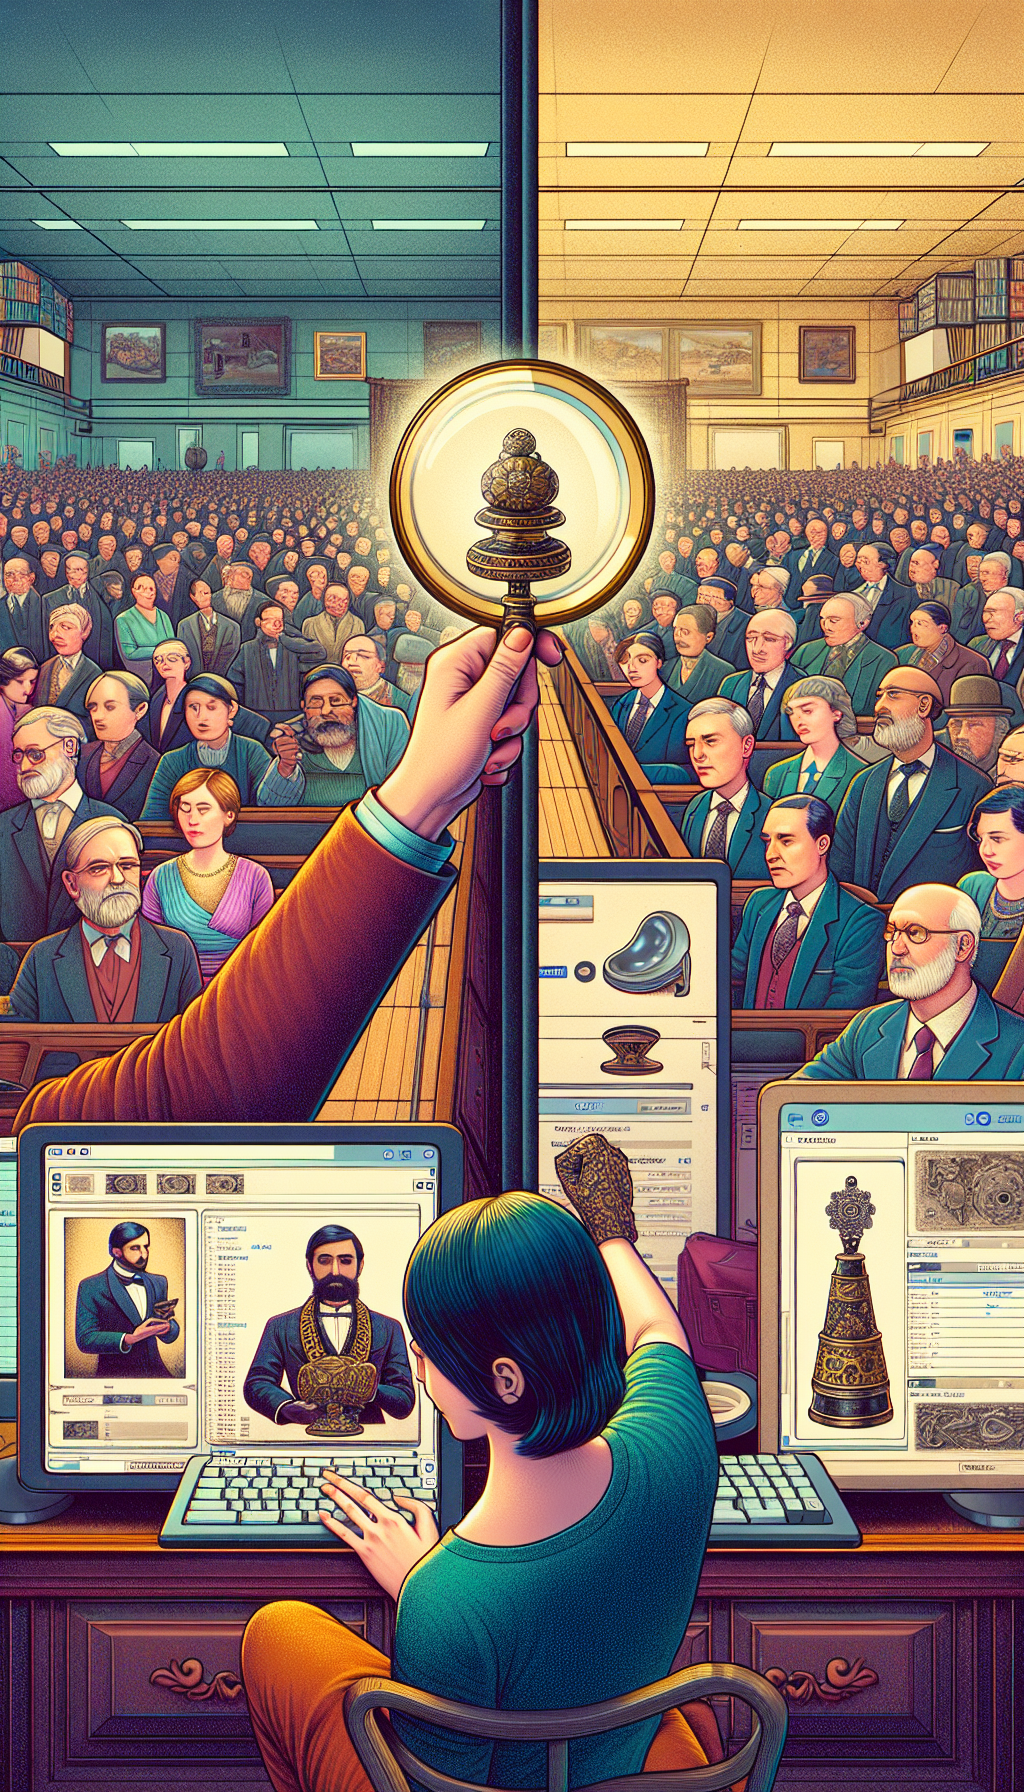 A split-screen illustration: on one side, a person holds an antique in a crowded auction house, surrounded by experts; on the other, a user uploads a photo of the item to an app on a computer screen. Both sides connected by a magnifying glass highlighting the antique, symbolizing scrutiny. The styles range from realistic to digital pixelation across the divide.